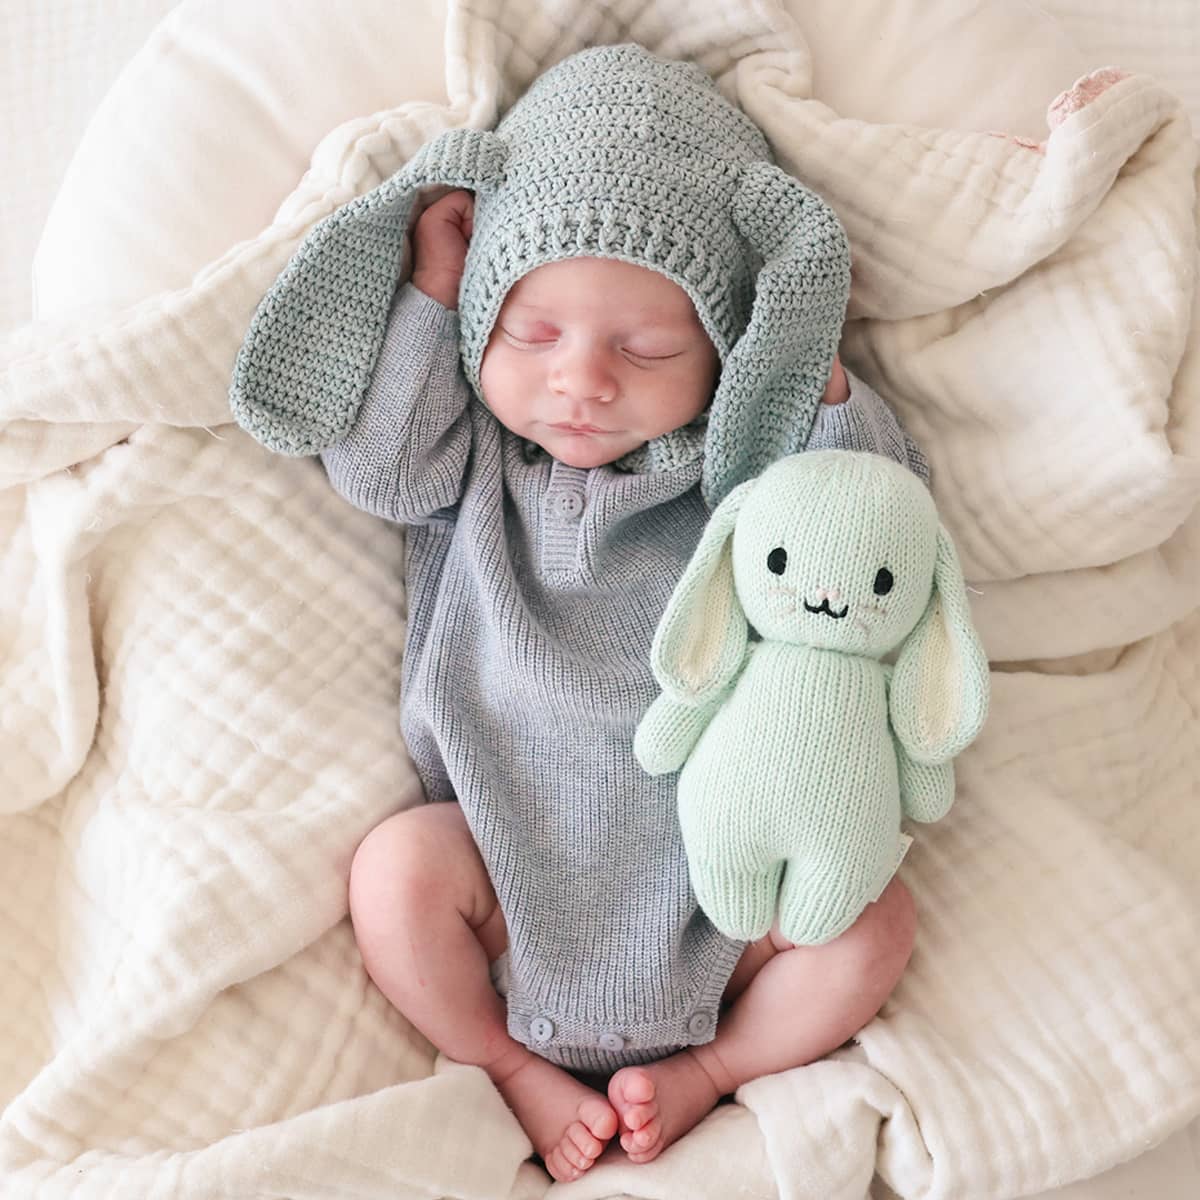 Cuddle + Kind Hand-Knit Doll - Baby Bunny (mint)